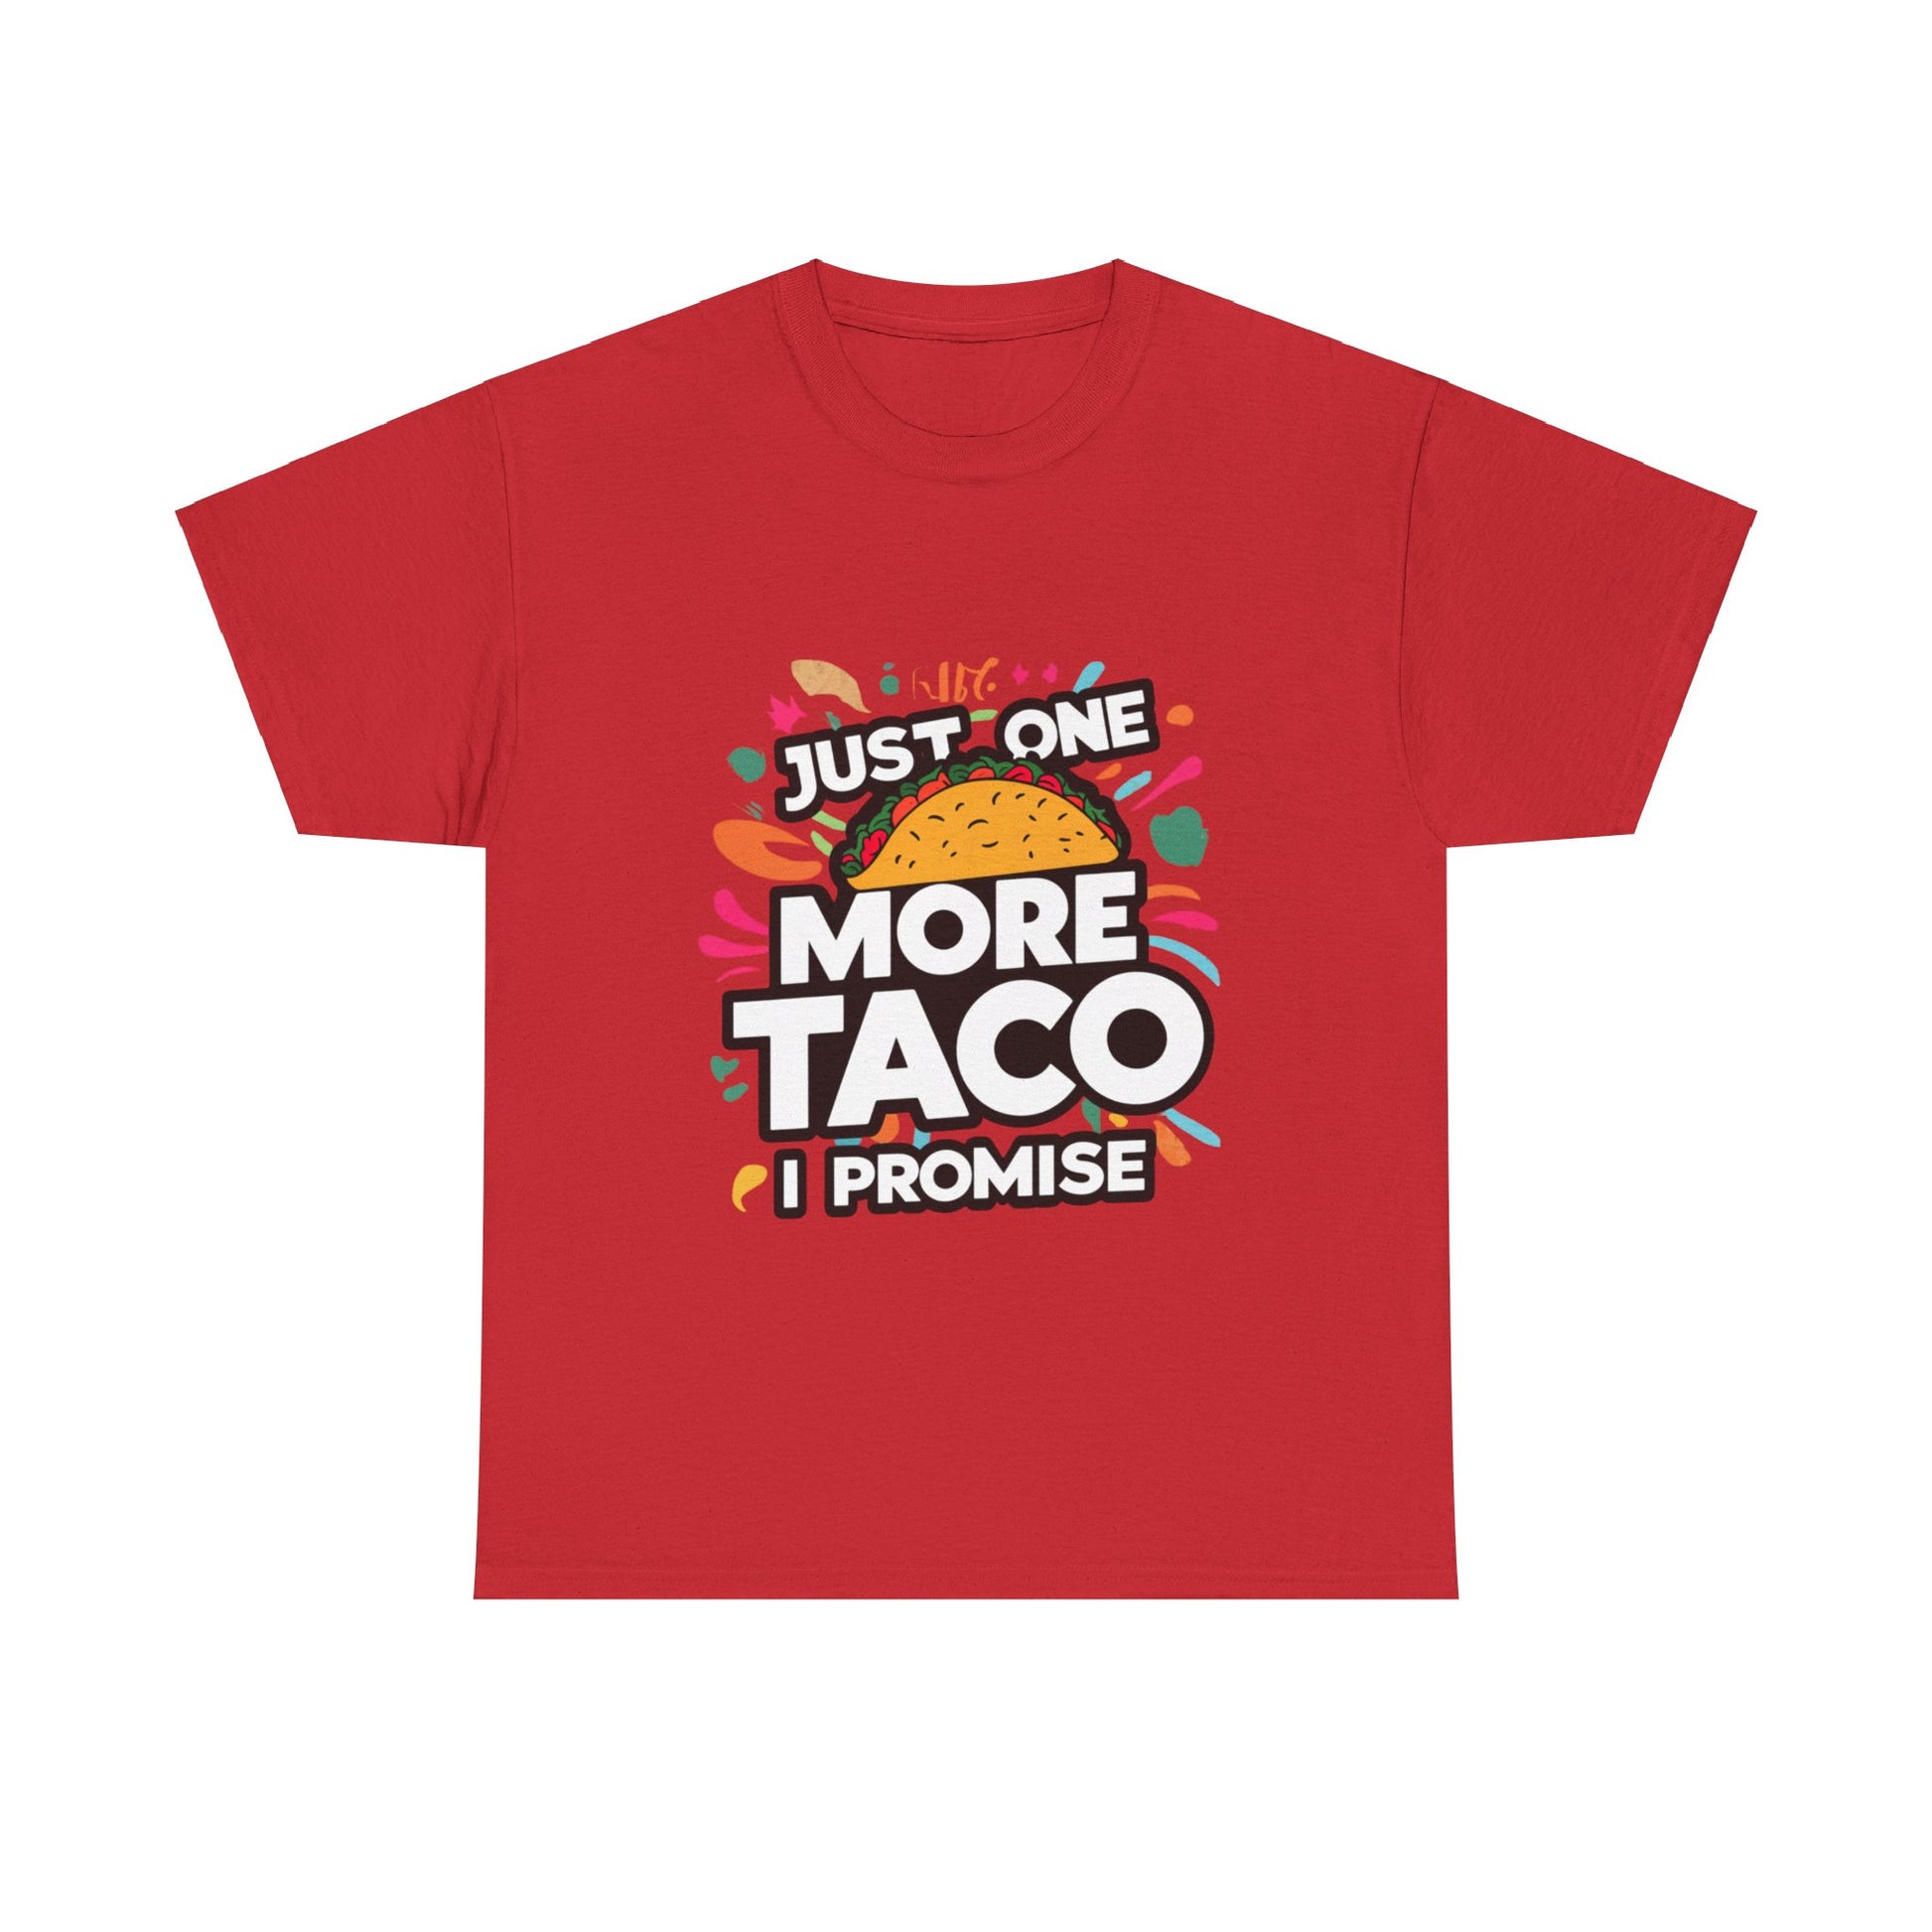 Just One More Taco I Promise Mexican Food Graphic Unisex Heavy Cotton Tee Cotton Funny Humorous Graphic Soft Premium Unisex Men Women Red T-shirt Birthday Gift-7